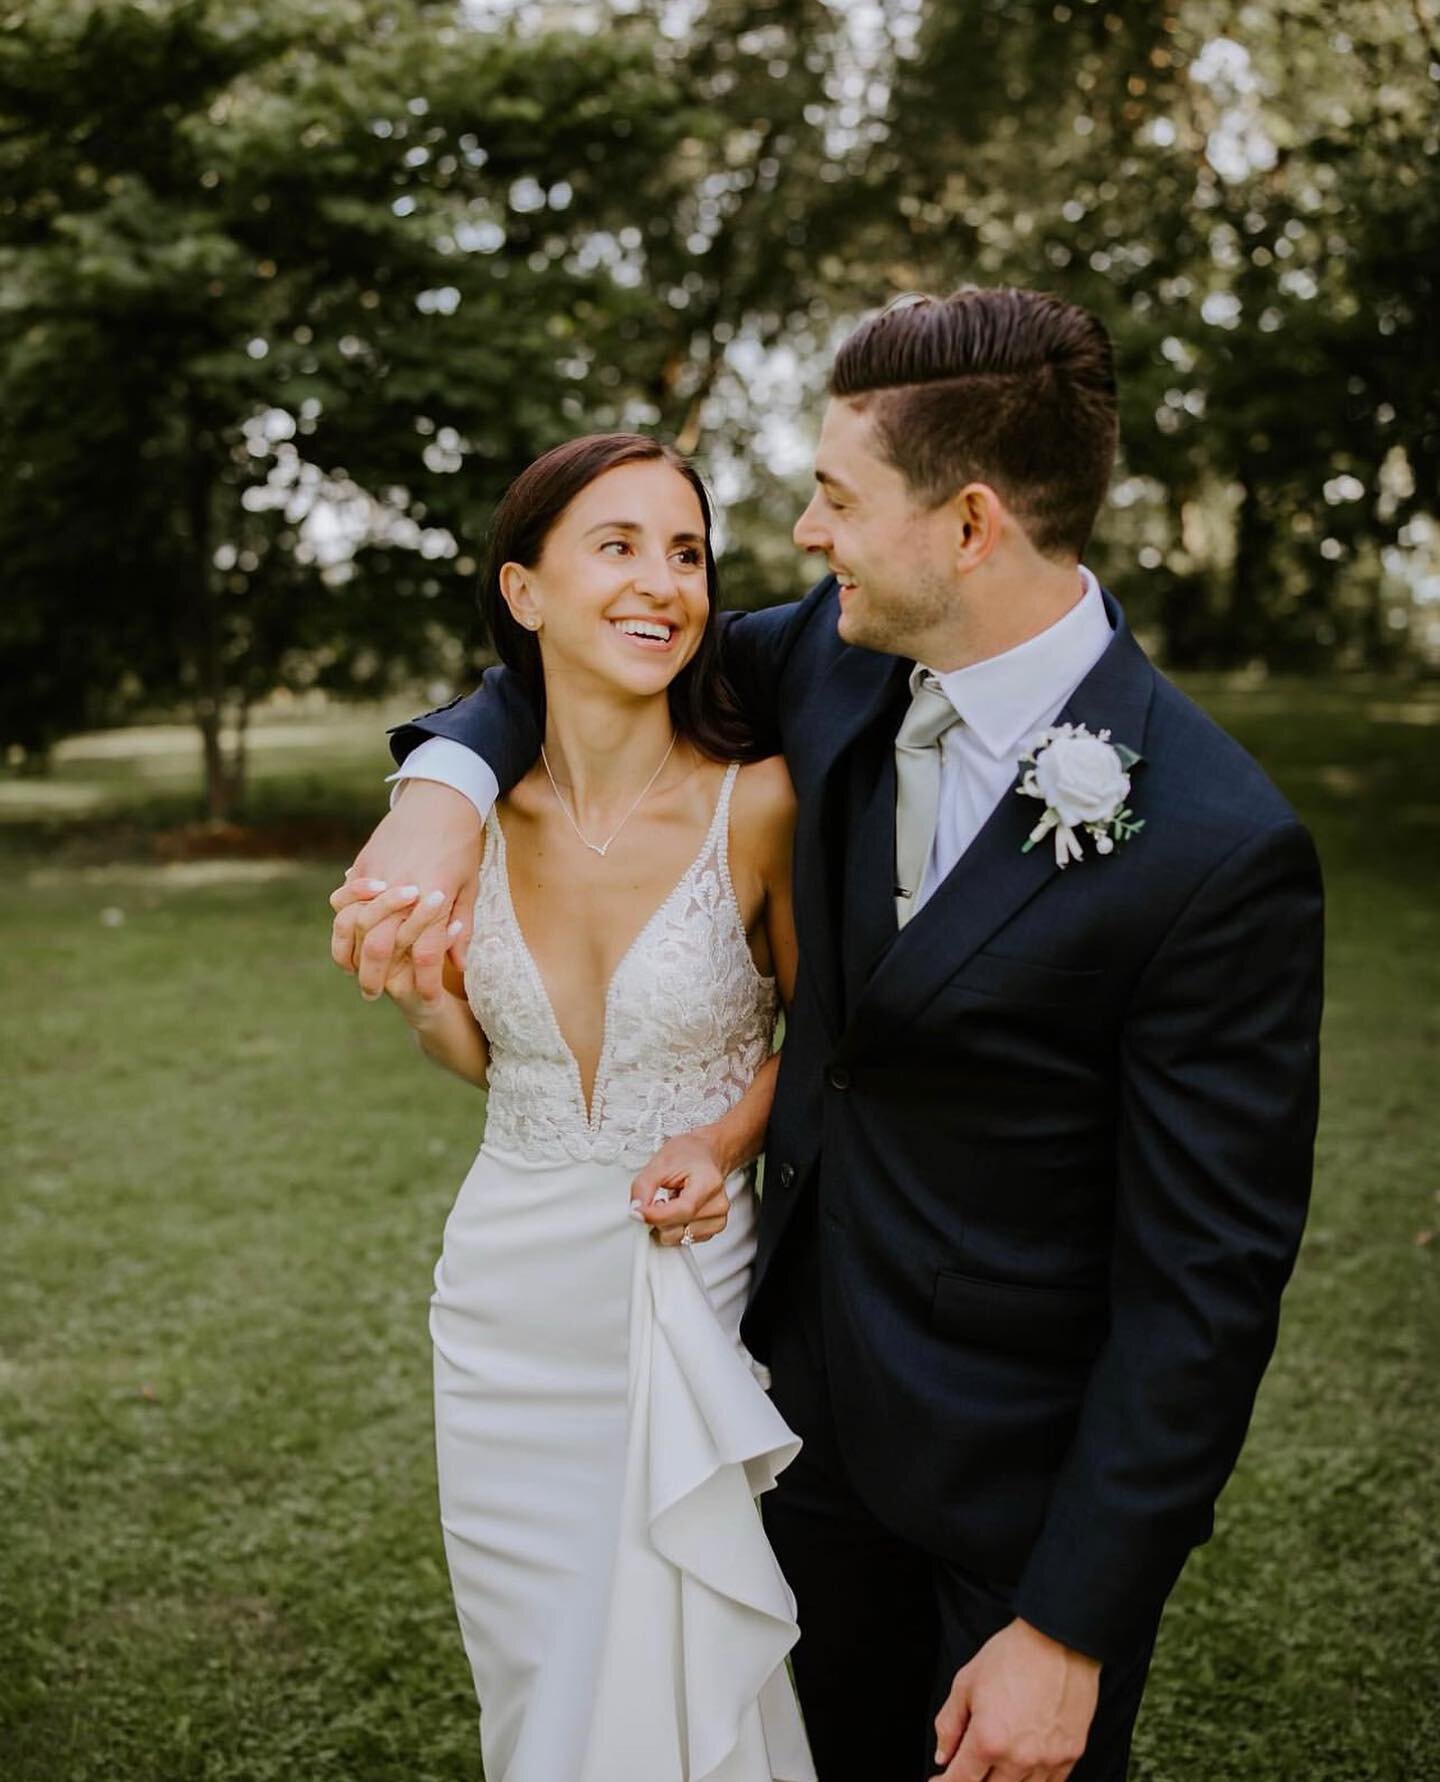 Can you imagine planning your entire wedding in less than a month? That&rsquo;s the beauty of having exclusive, in-house vendors 🪄

&ldquo;My wife and I planned our wedding in 3.5 short weeks and everything went perfectly to plan. From Monique (coor